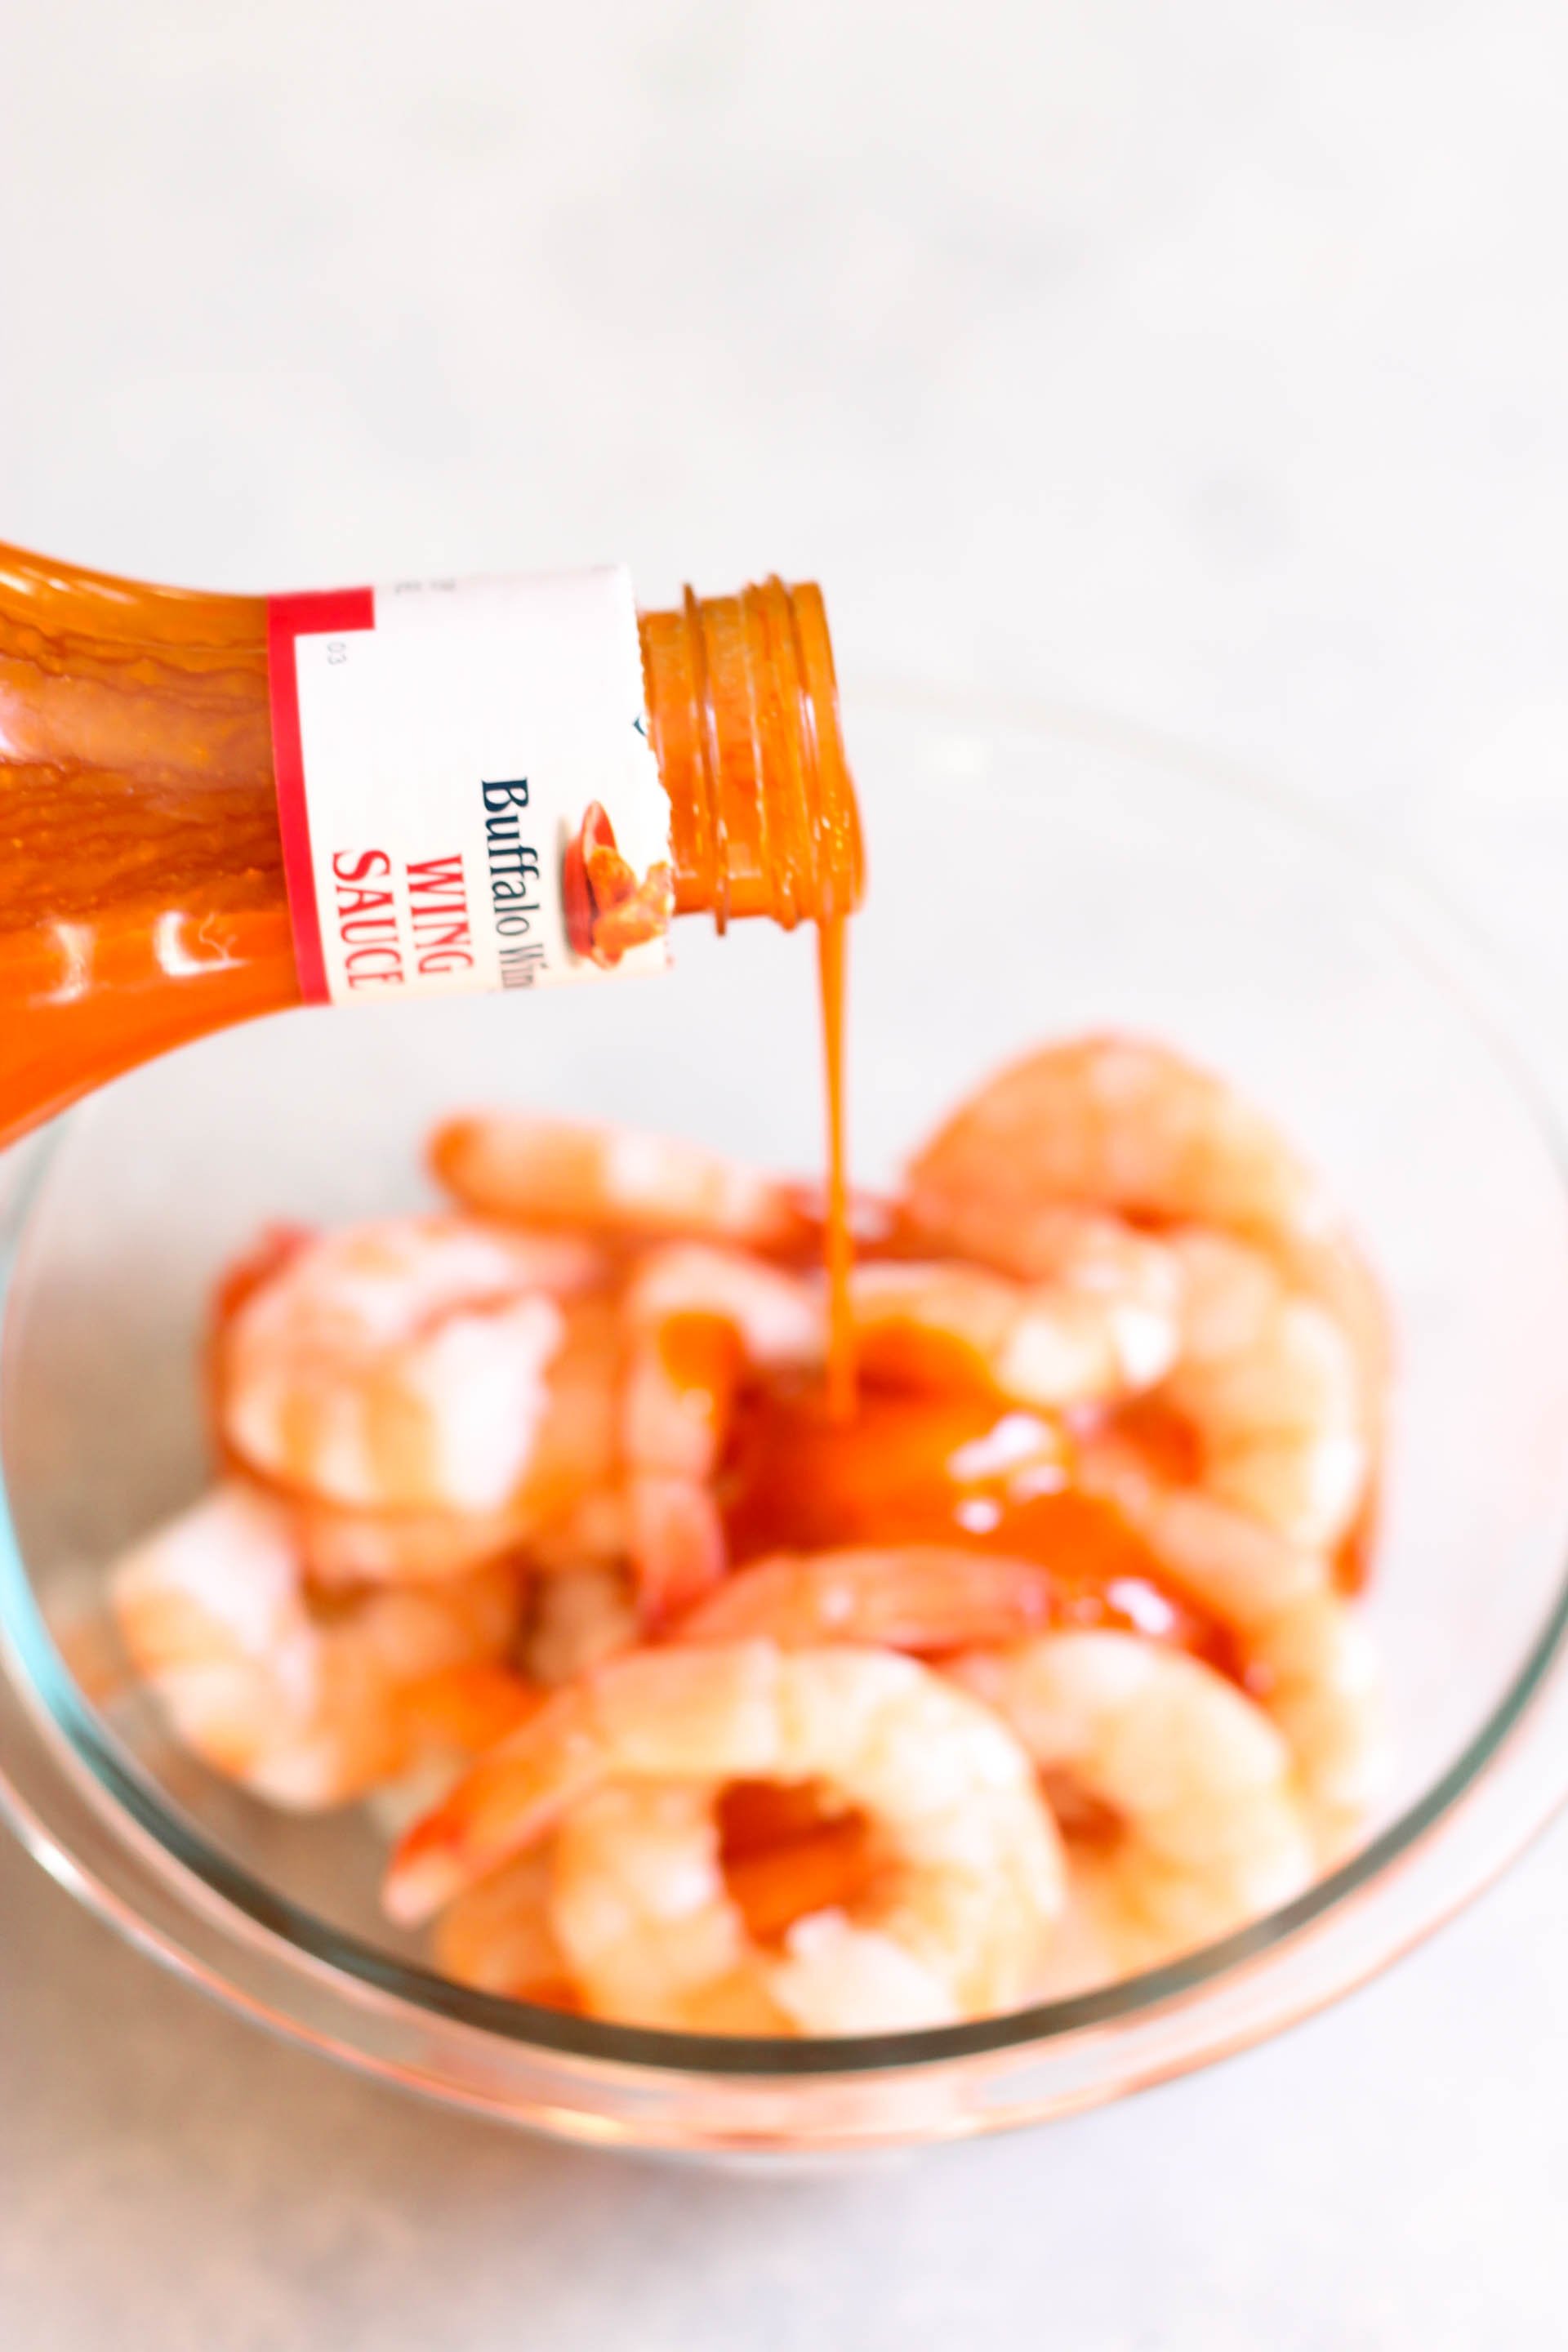 Raw shrimp in a mixing bowl with wing sauce being poured on top